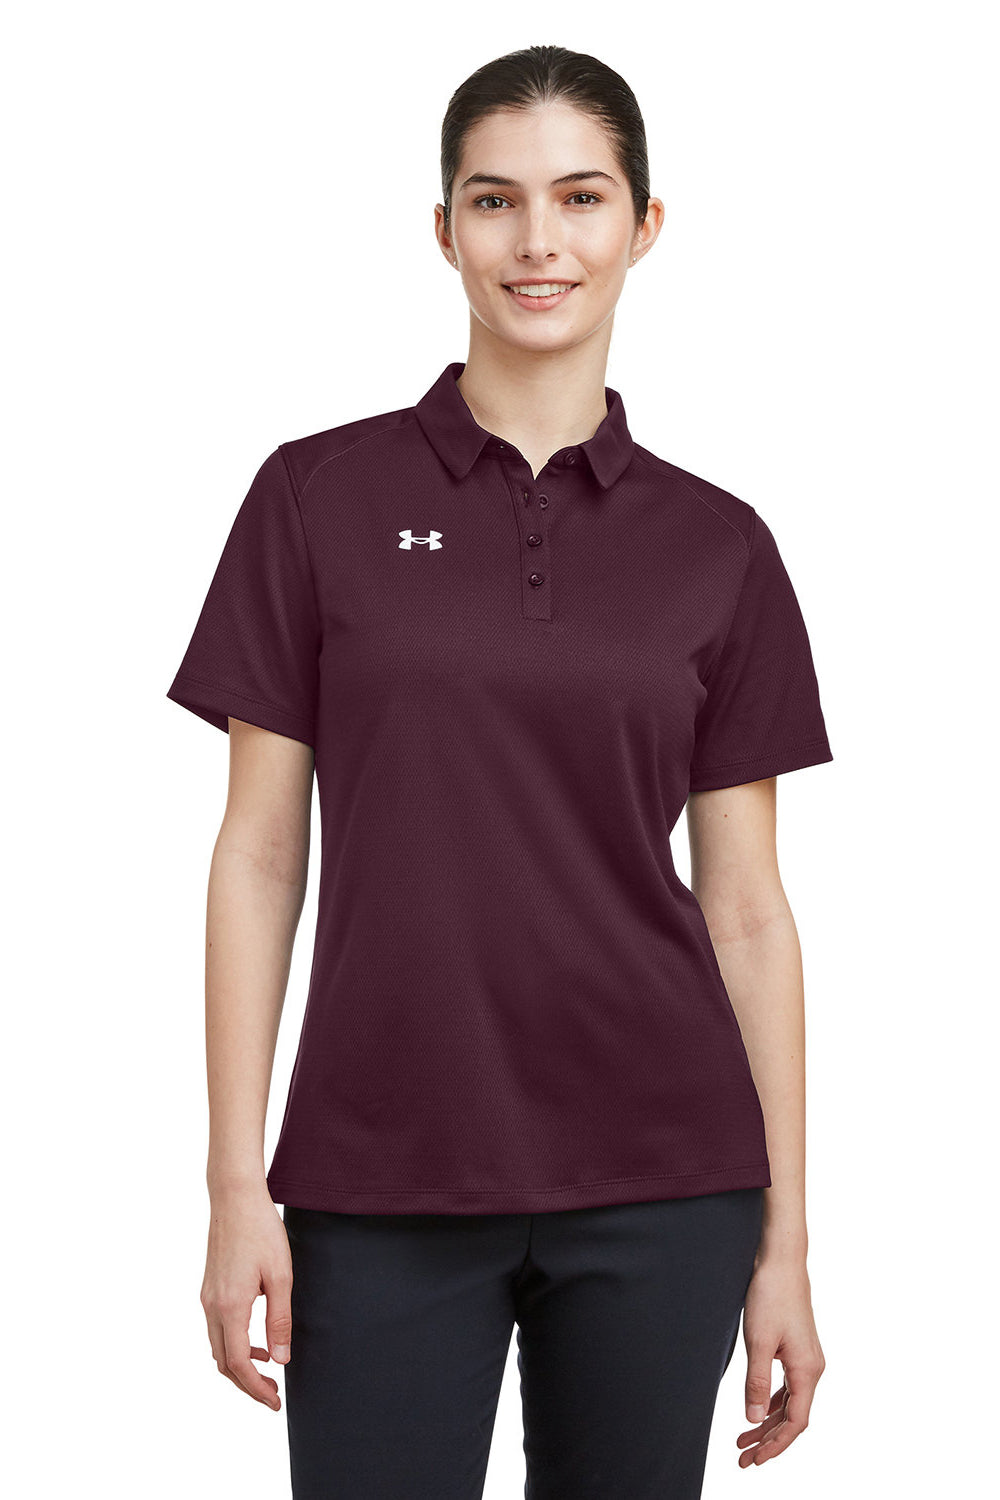 Under Armour 1370431 Womens Tech Moisture Wicking Short Sleeve Polo Shirt Maroon Model Front